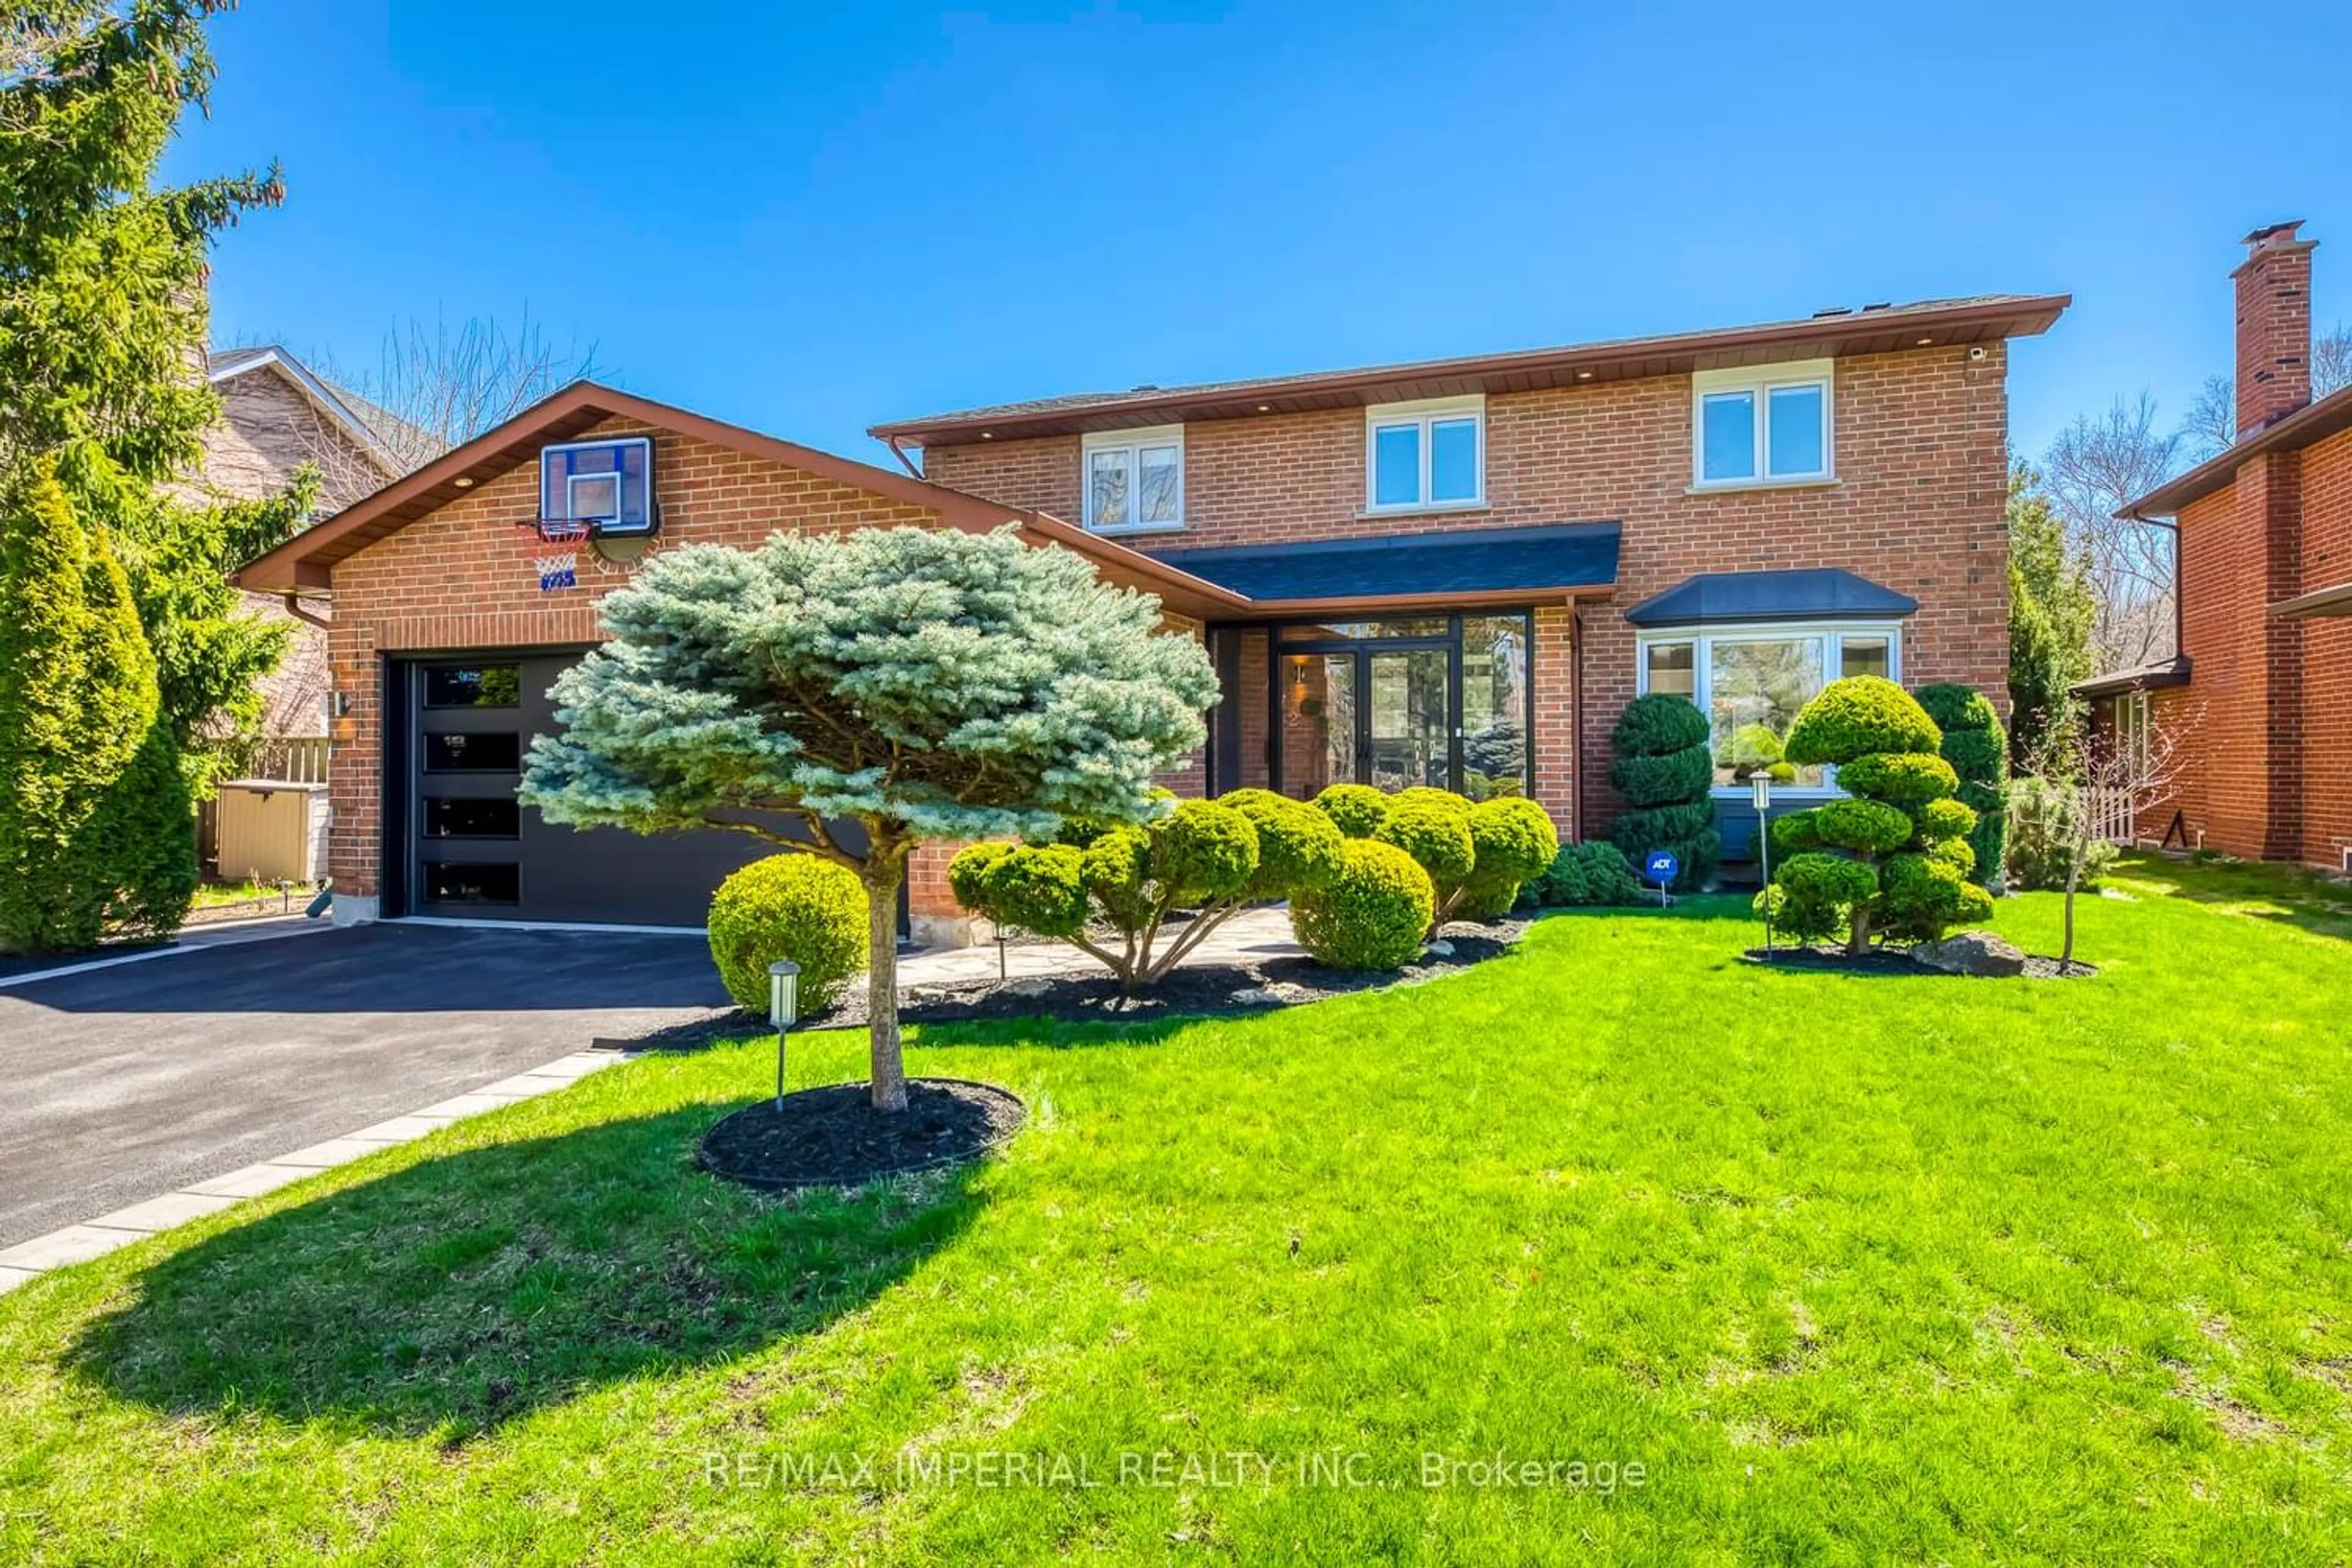 Home with brick exterior material for 472 Aspen Forest Dr, Oakville Ontario L6J 6H6